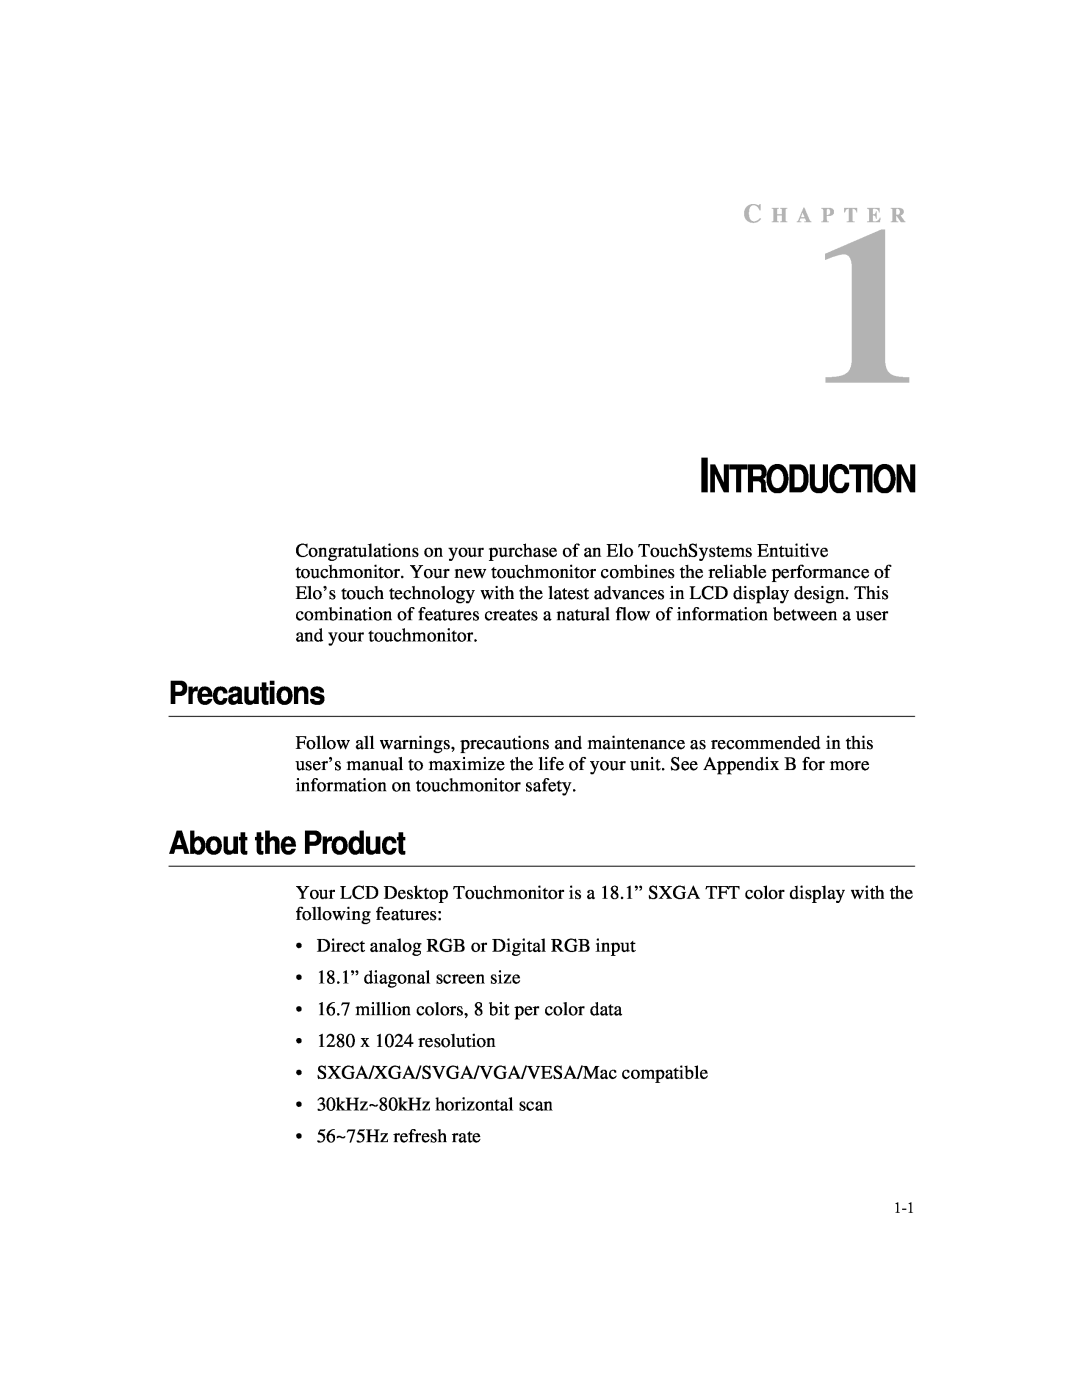 Elo TouchSystems 1827L, 1825L manual Precautions, About the Product, Introduction, C H A P T E R 